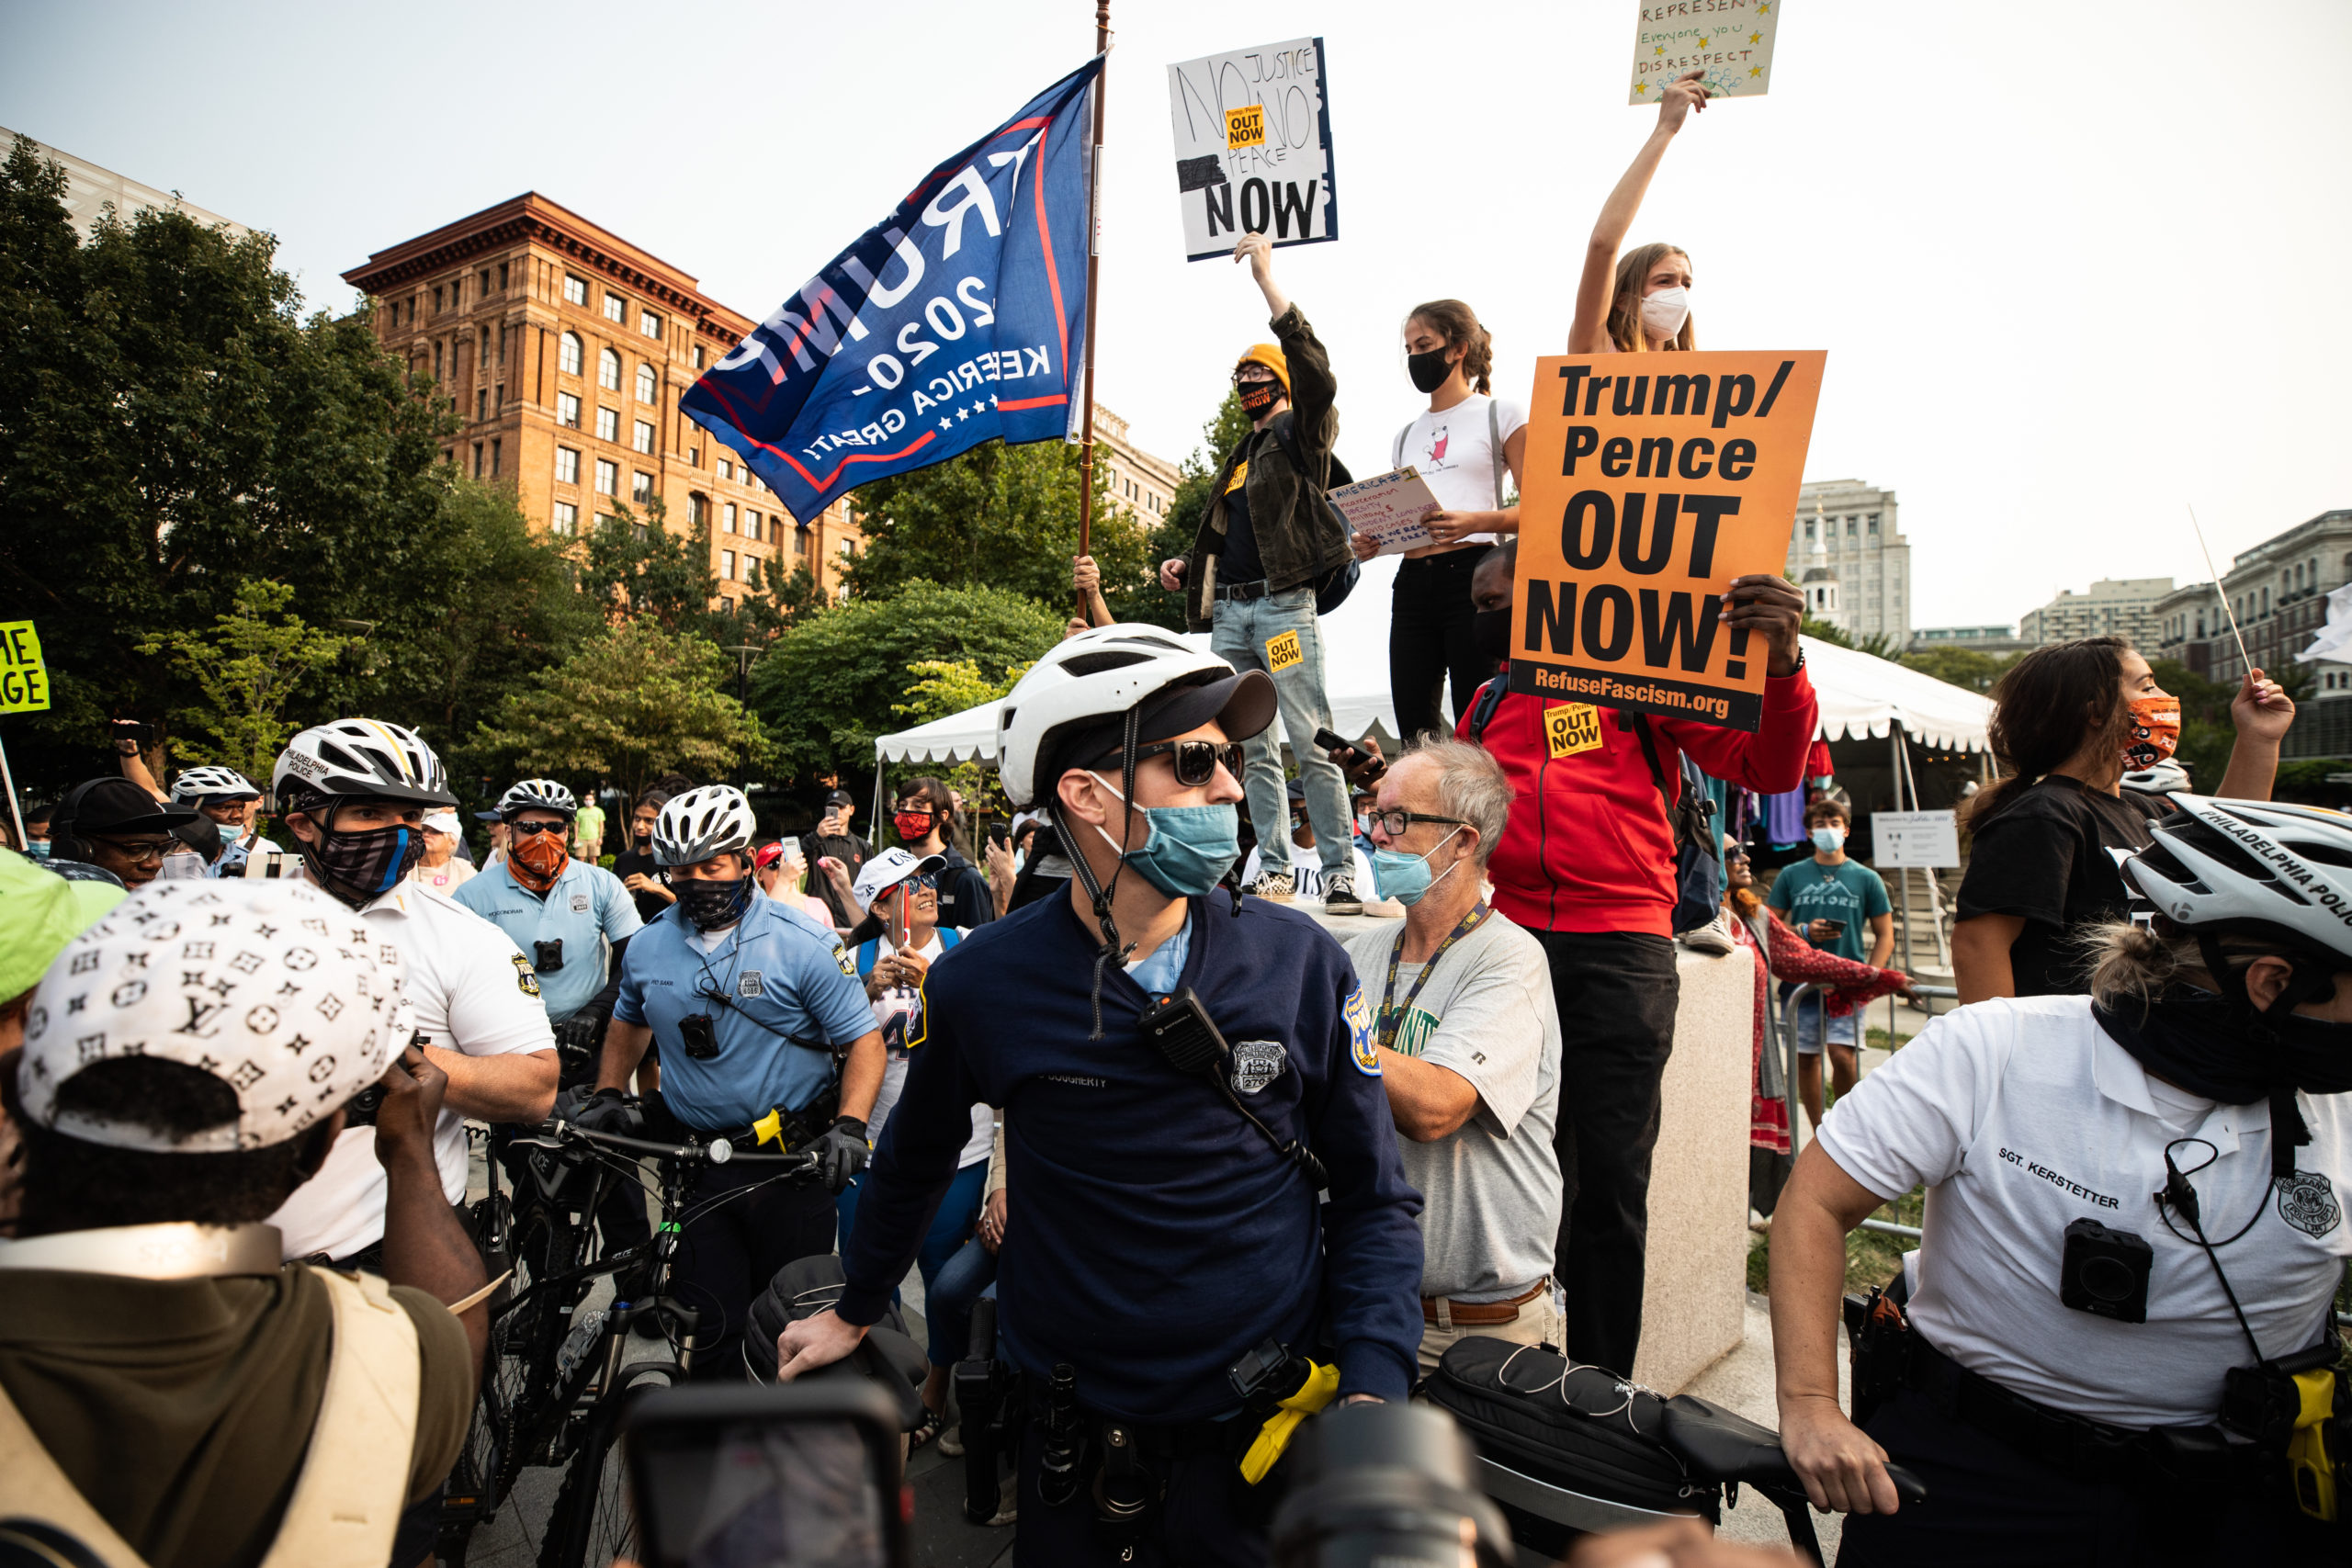 Police form a bike line between Trump supporters and protesters in Philadelphia, Pennsylvania on Sept. 15, 2020. (Photo: Kaylee Greenlee / DCNF)